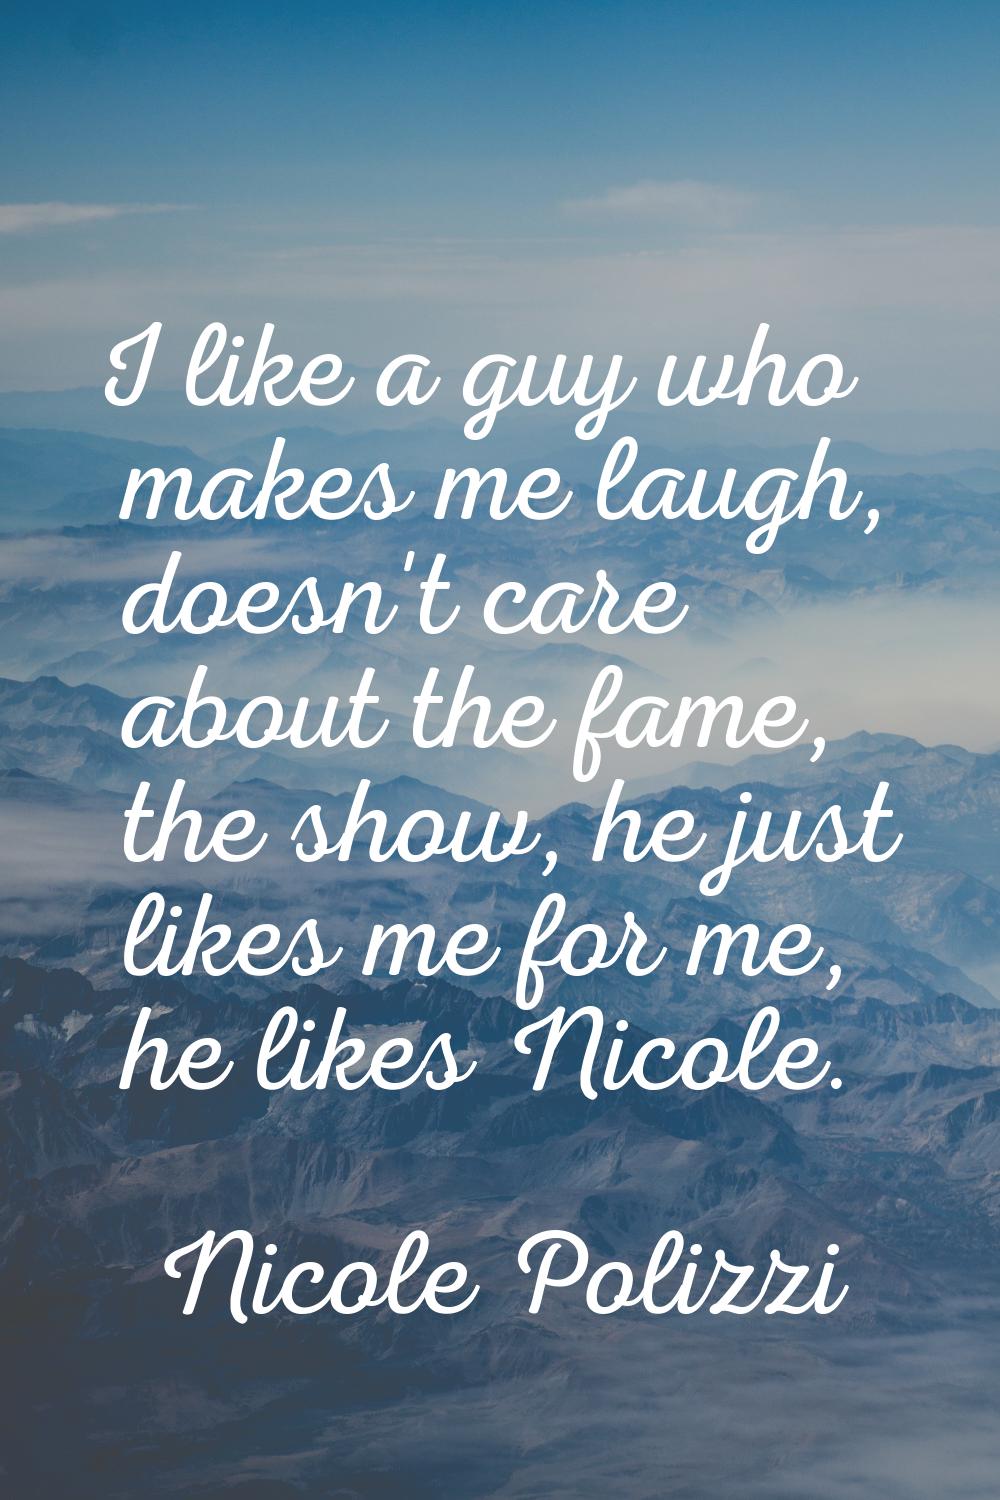 I like a guy who makes me laugh, doesn't care about the fame, the show, he just likes me for me, he